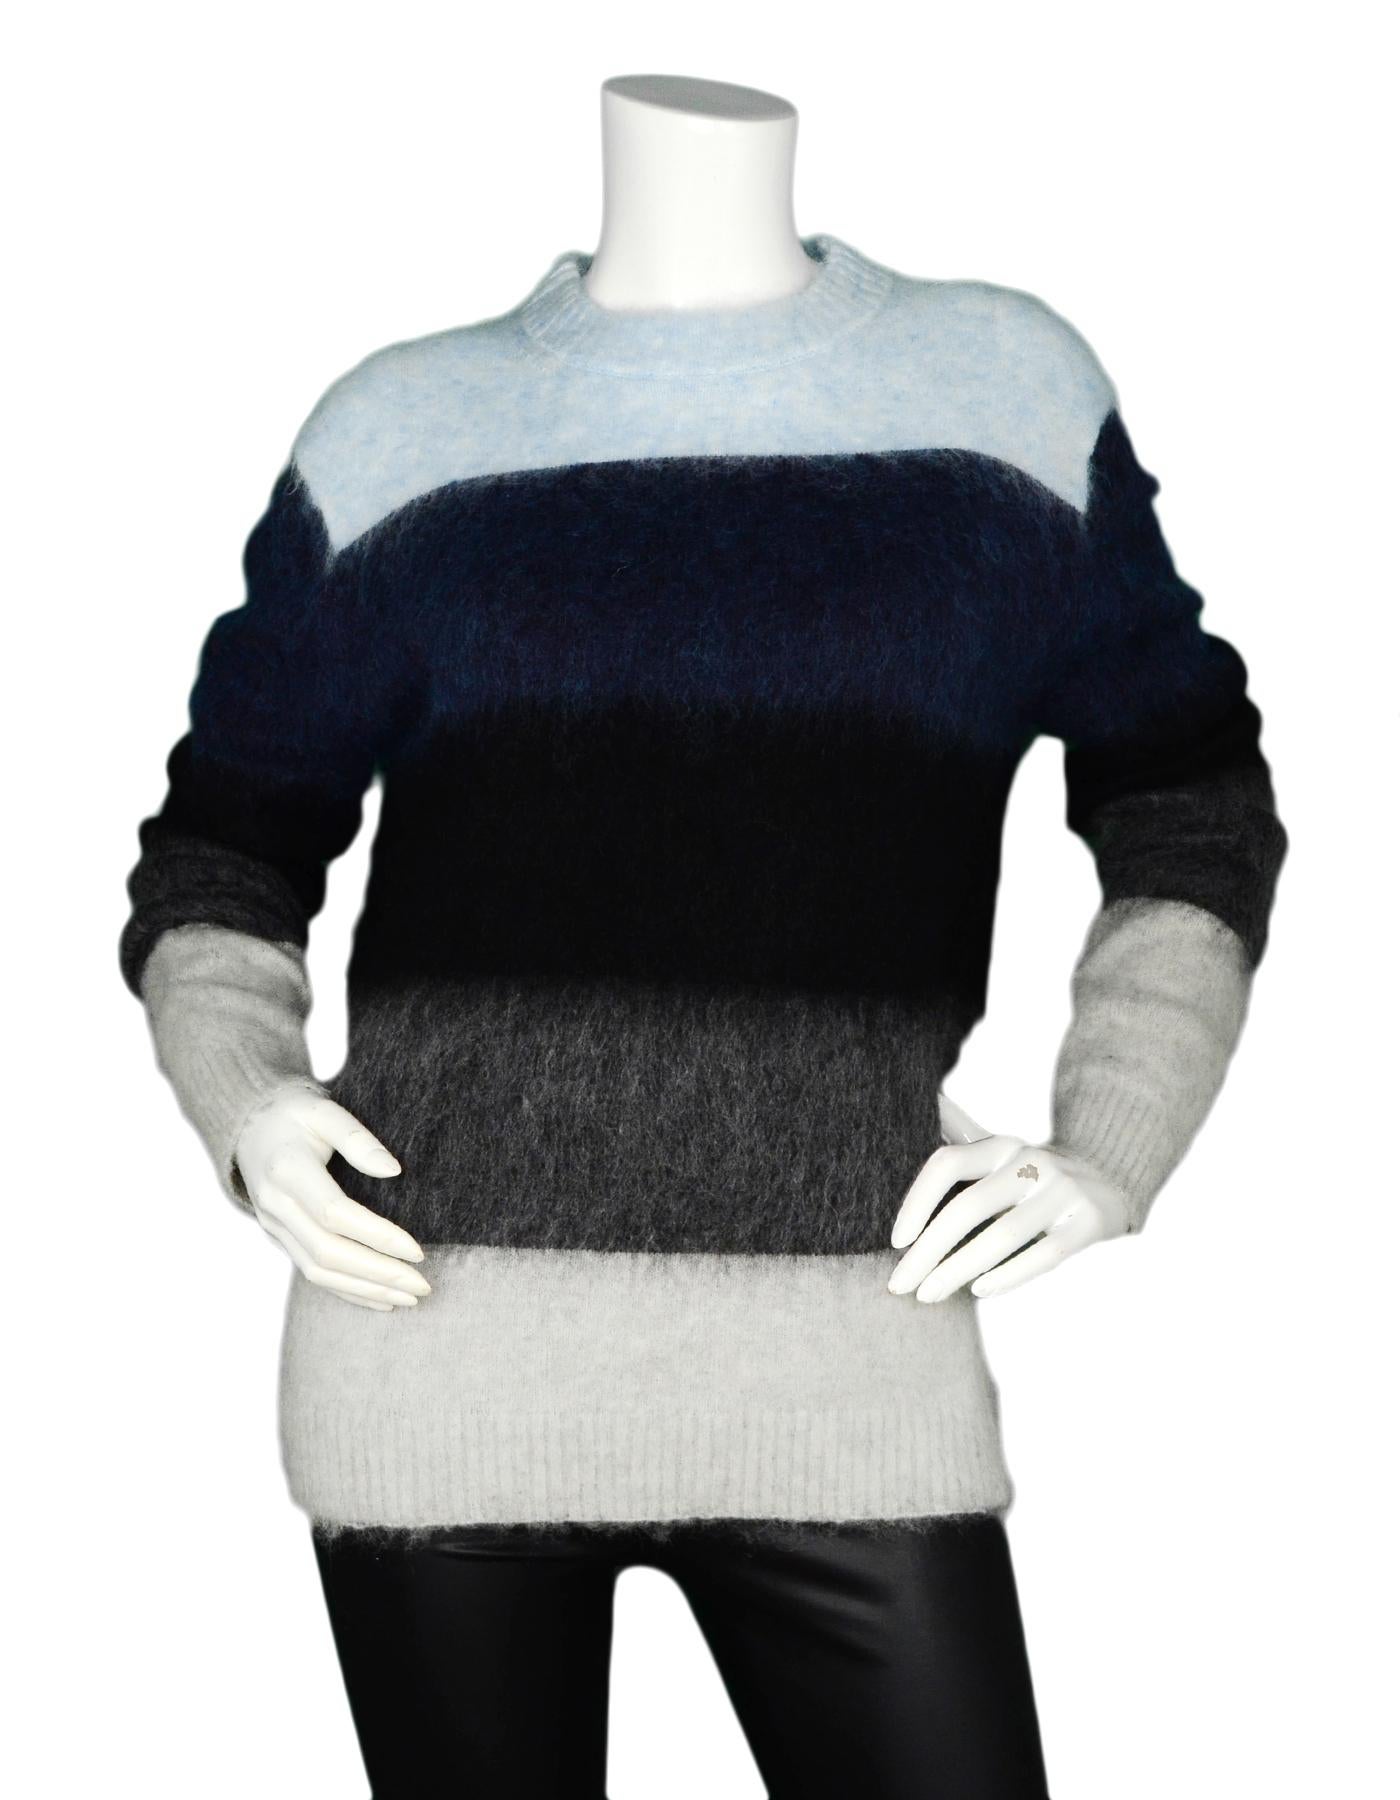 ACNE Studios Blue/Grey/Black Striped Long Sleeve Mohair Sweater NWT Sz XXS

Made In: China 
Color: Blue, grey, black
Materials: 38% nylon, 28% mohair, 4% elastane 
Opening/Closure: Pull over
Overall Condition: Excellent condition with original tags